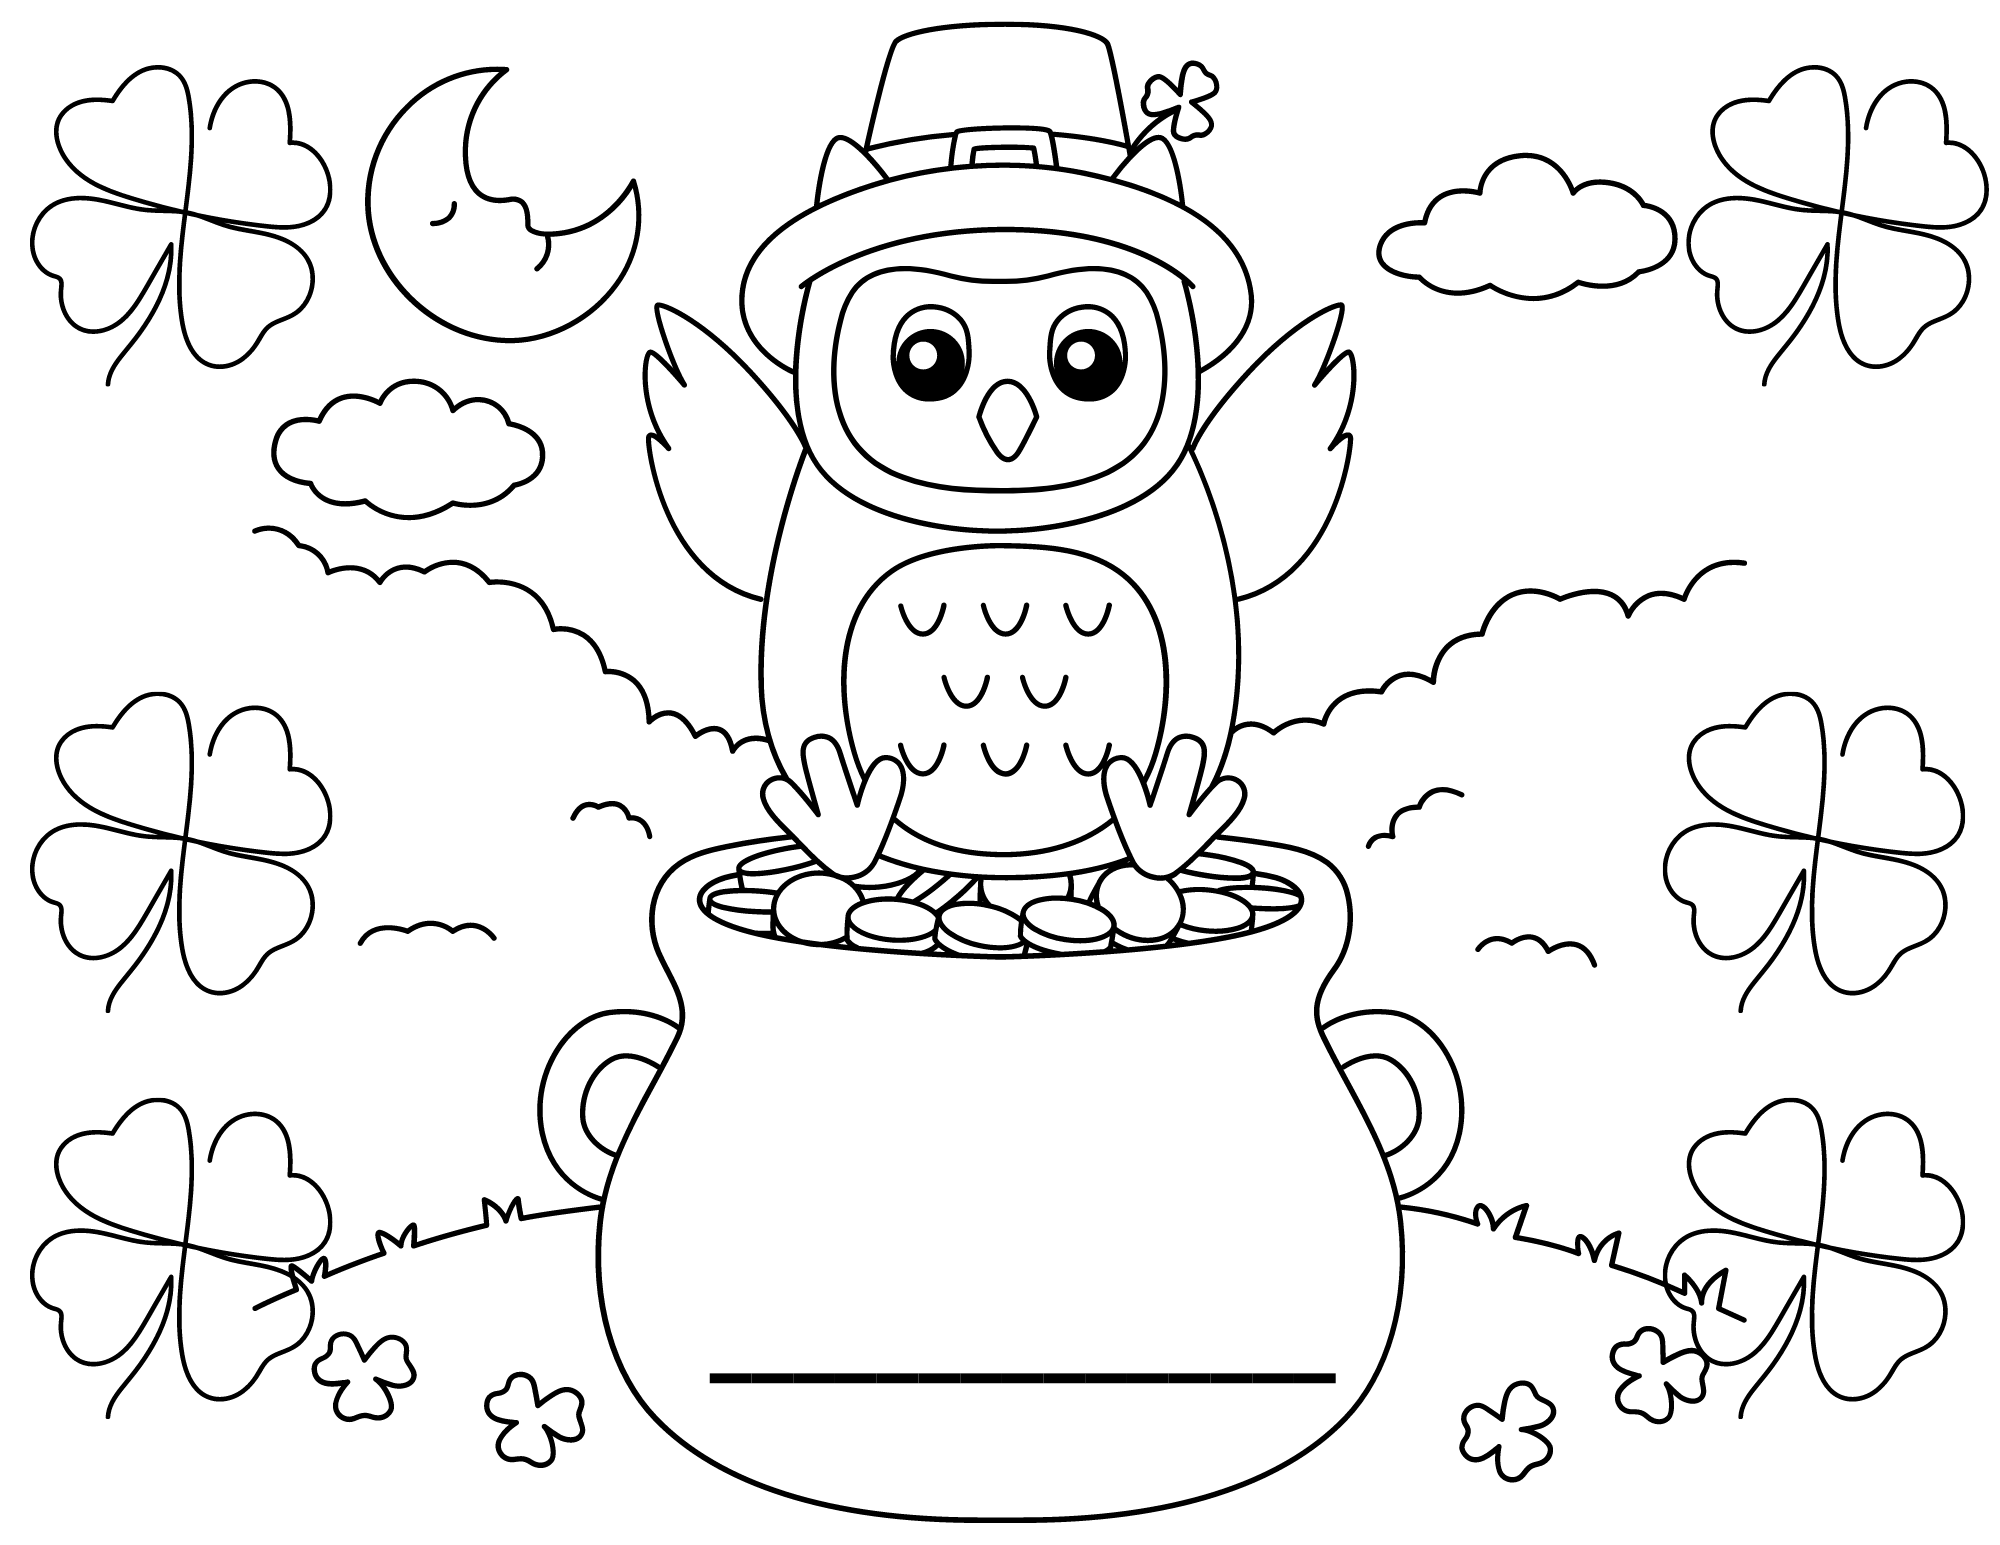 St. Patrick's Day owl and pot of gold coloring page